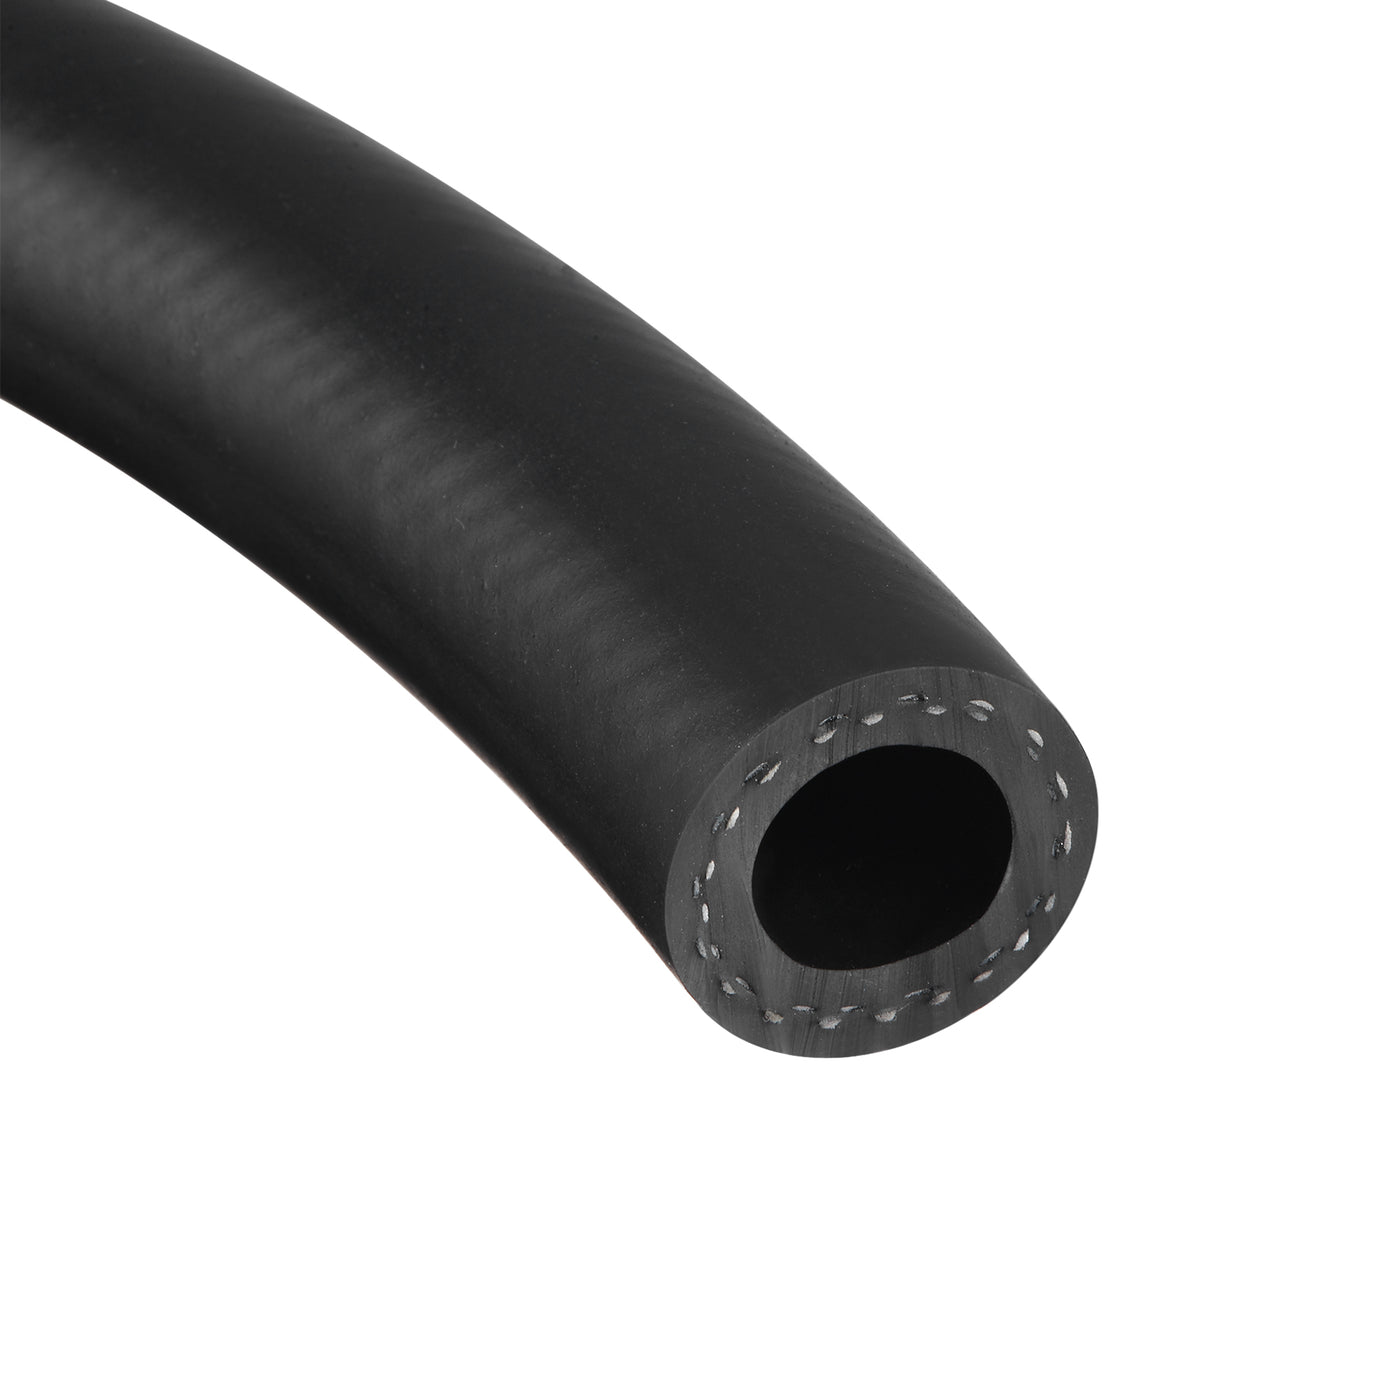 uxcell Uxcell 16mm ID Fuel Line Hose, 26mm OD 2ft Black Rubber Oil Hose for Fuel System, Oil, Lubricant